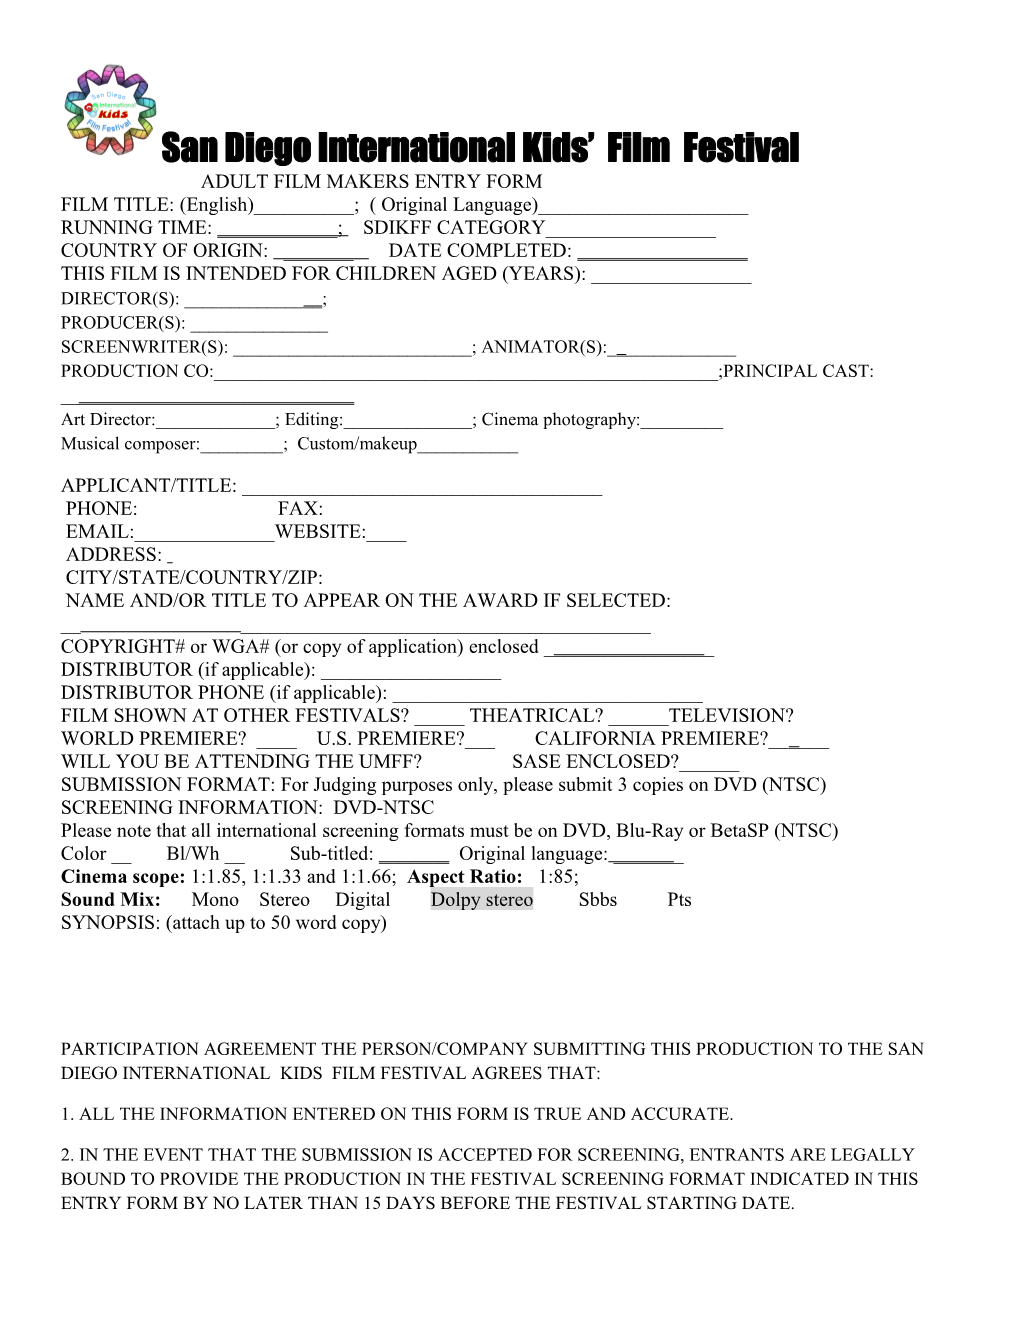 Adult Film Makers Entry Form